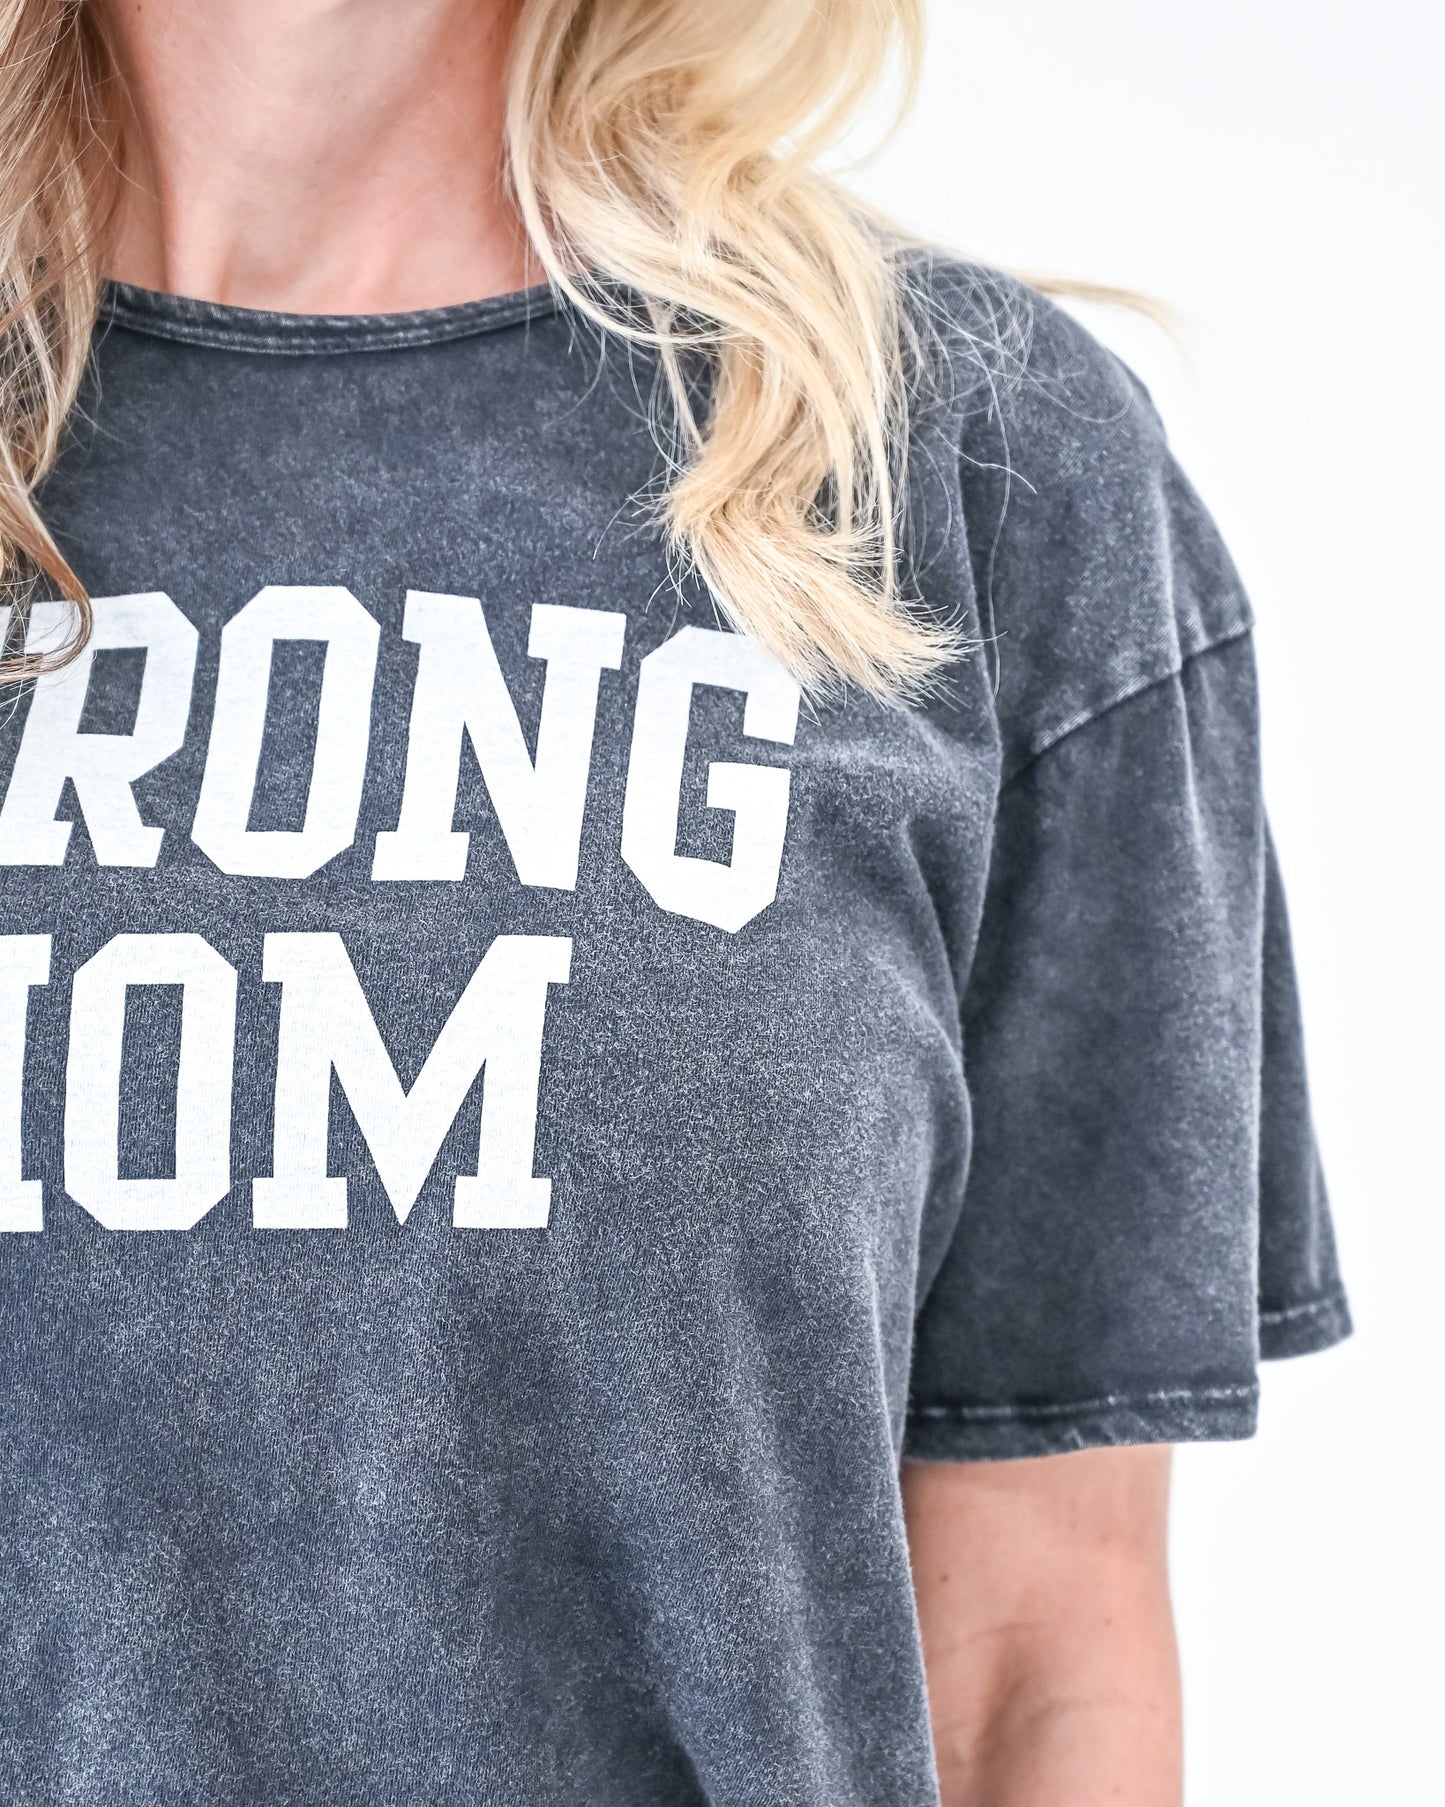 "Strong Mom" Mineral Washed Top